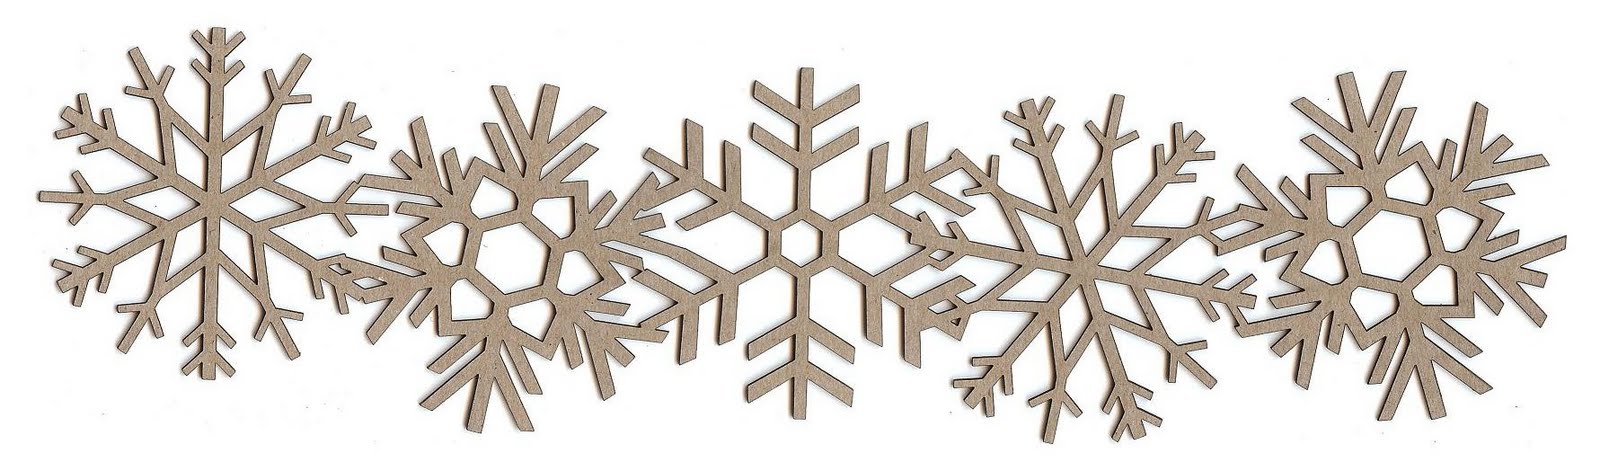 snowflake clipart in word - photo #12